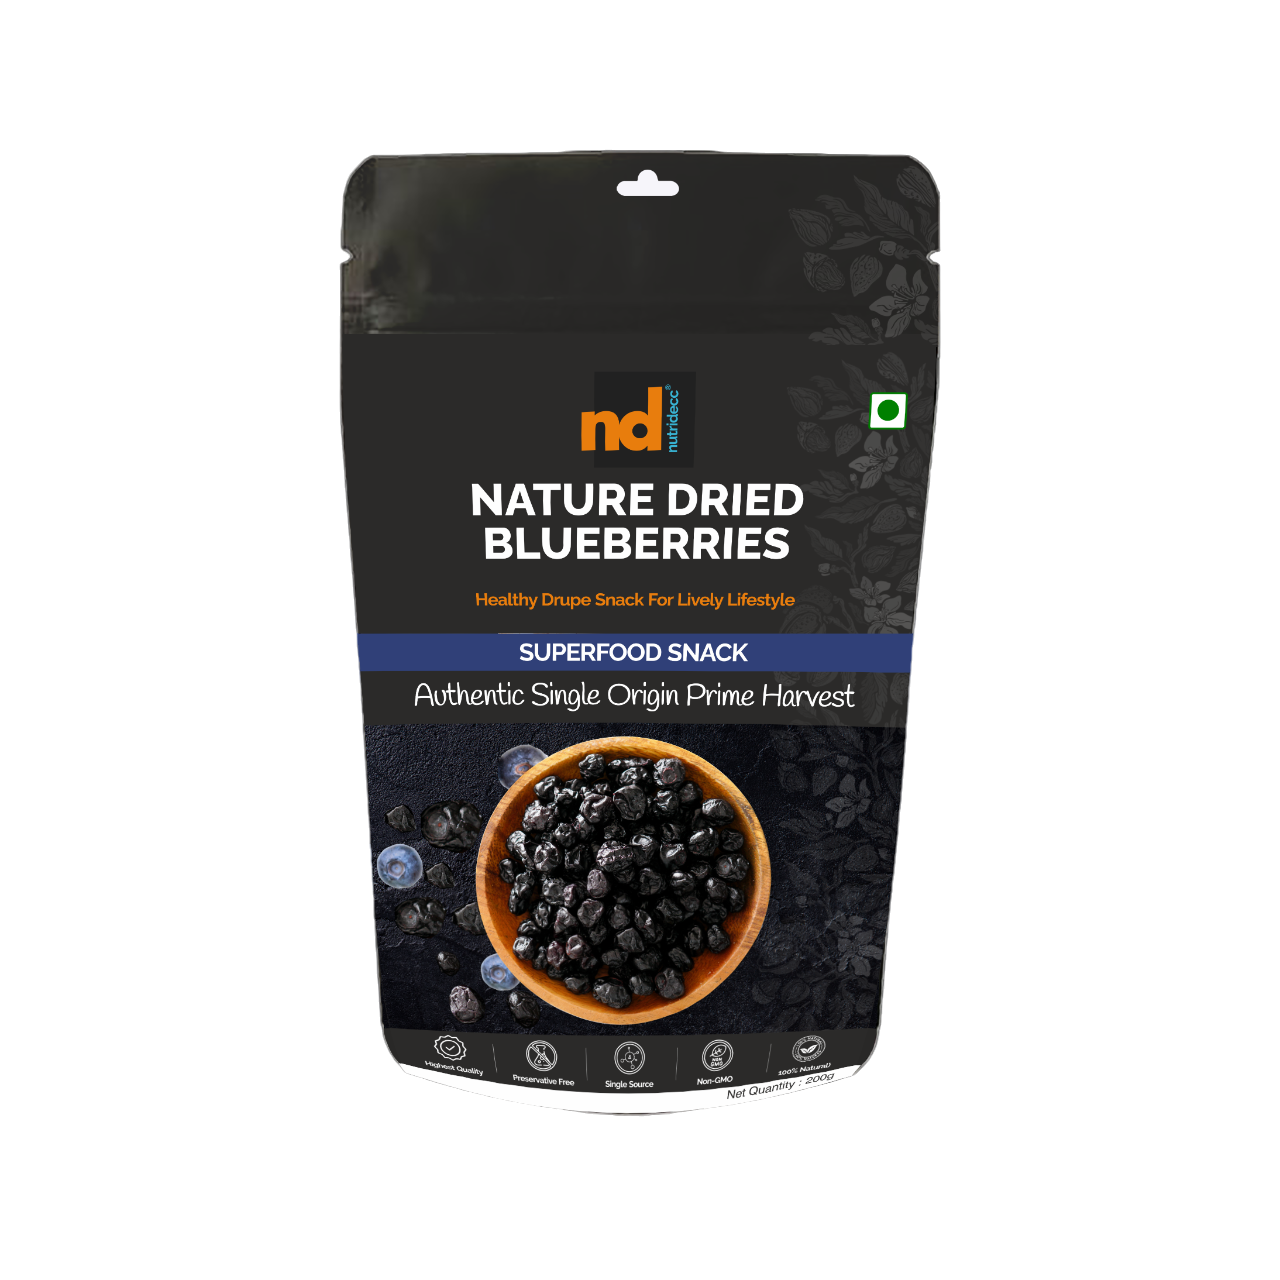 Nutridecc | Berrylicious Delights: Elevate Your Snacking Experience with Premium Natural Dried Blueberries for a Healthier, Happier You